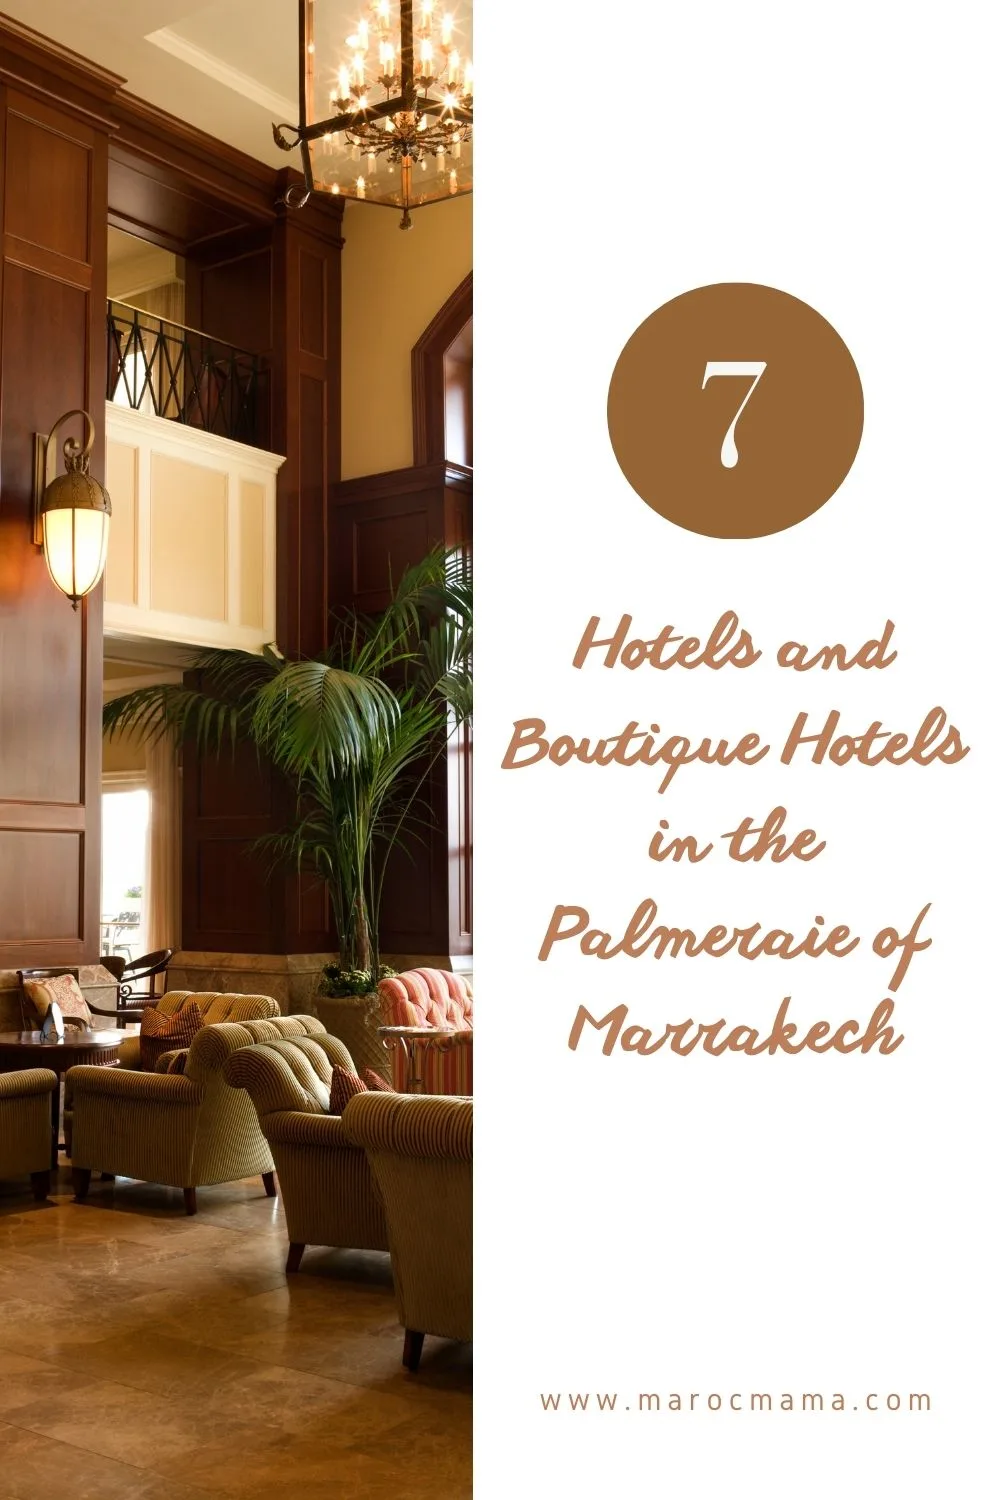 Lobby of a Hotel in Marrakech with the text 7 Hotels and Boutique Hotels in the Palmeraie of Marrakech